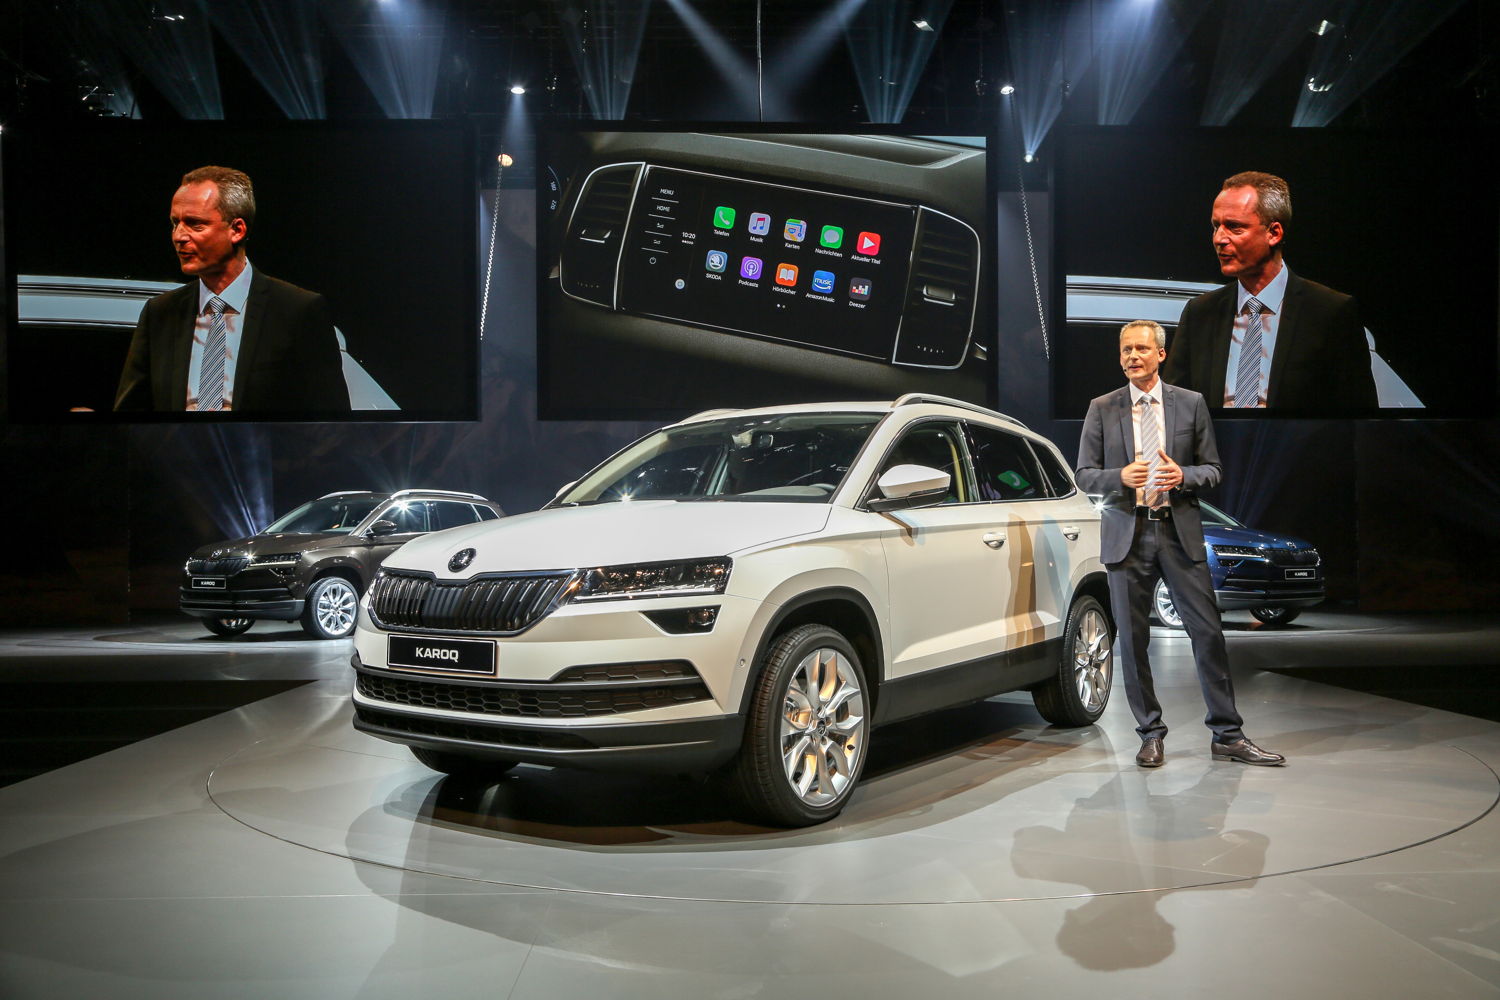 On 18 May 2017, Member of the Board of Management for Technical Development Christian Strube presented the new ŠKODA KAROQ compact SUV.